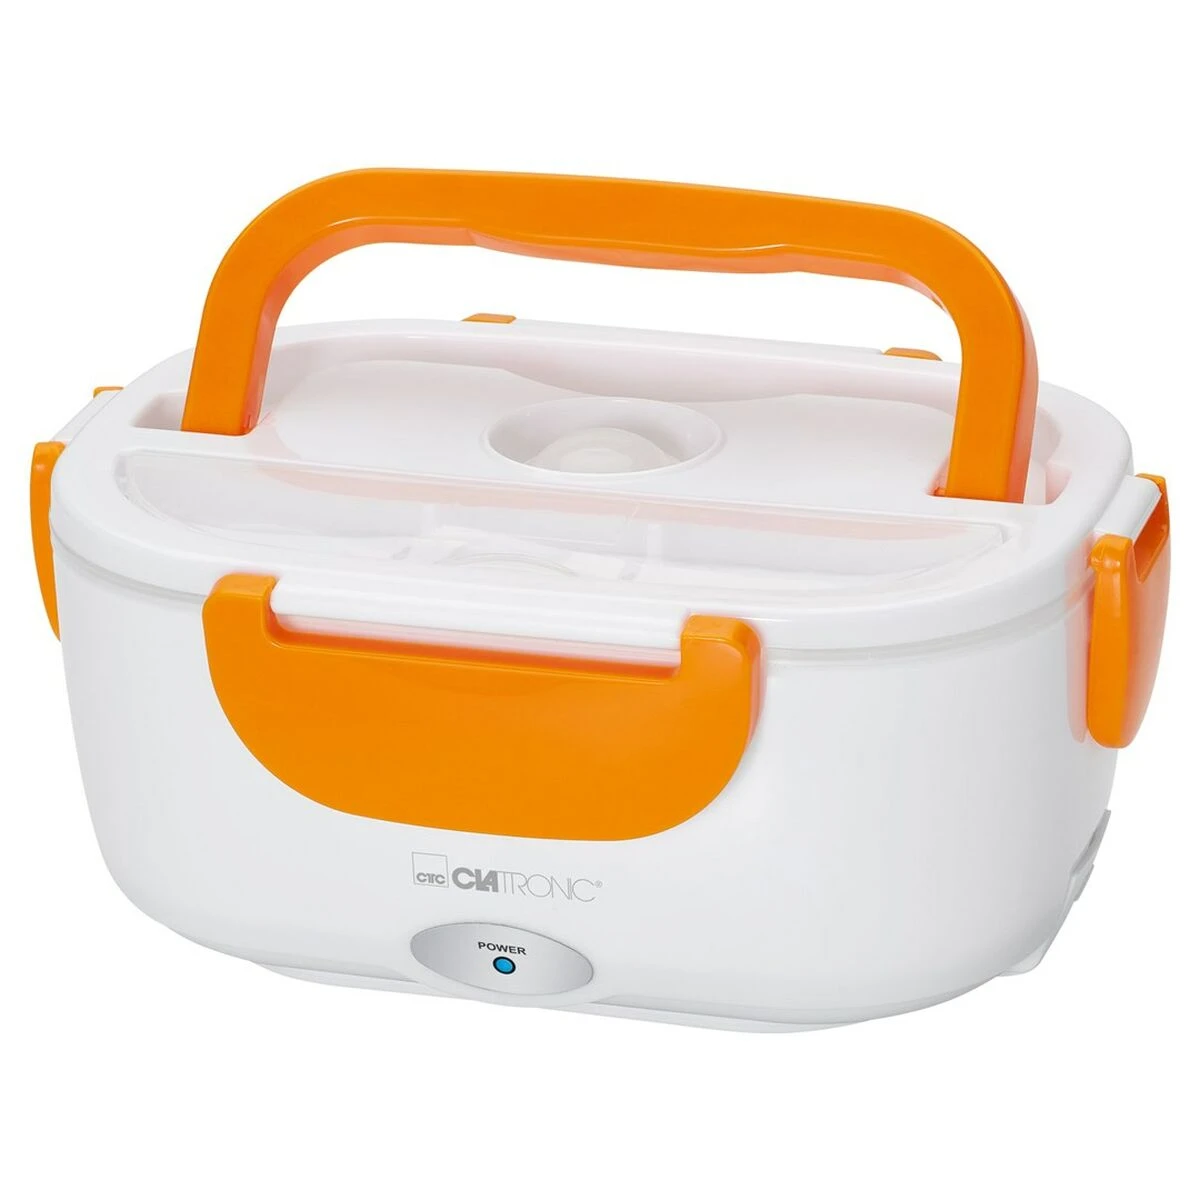 White and orange electric lunchbox